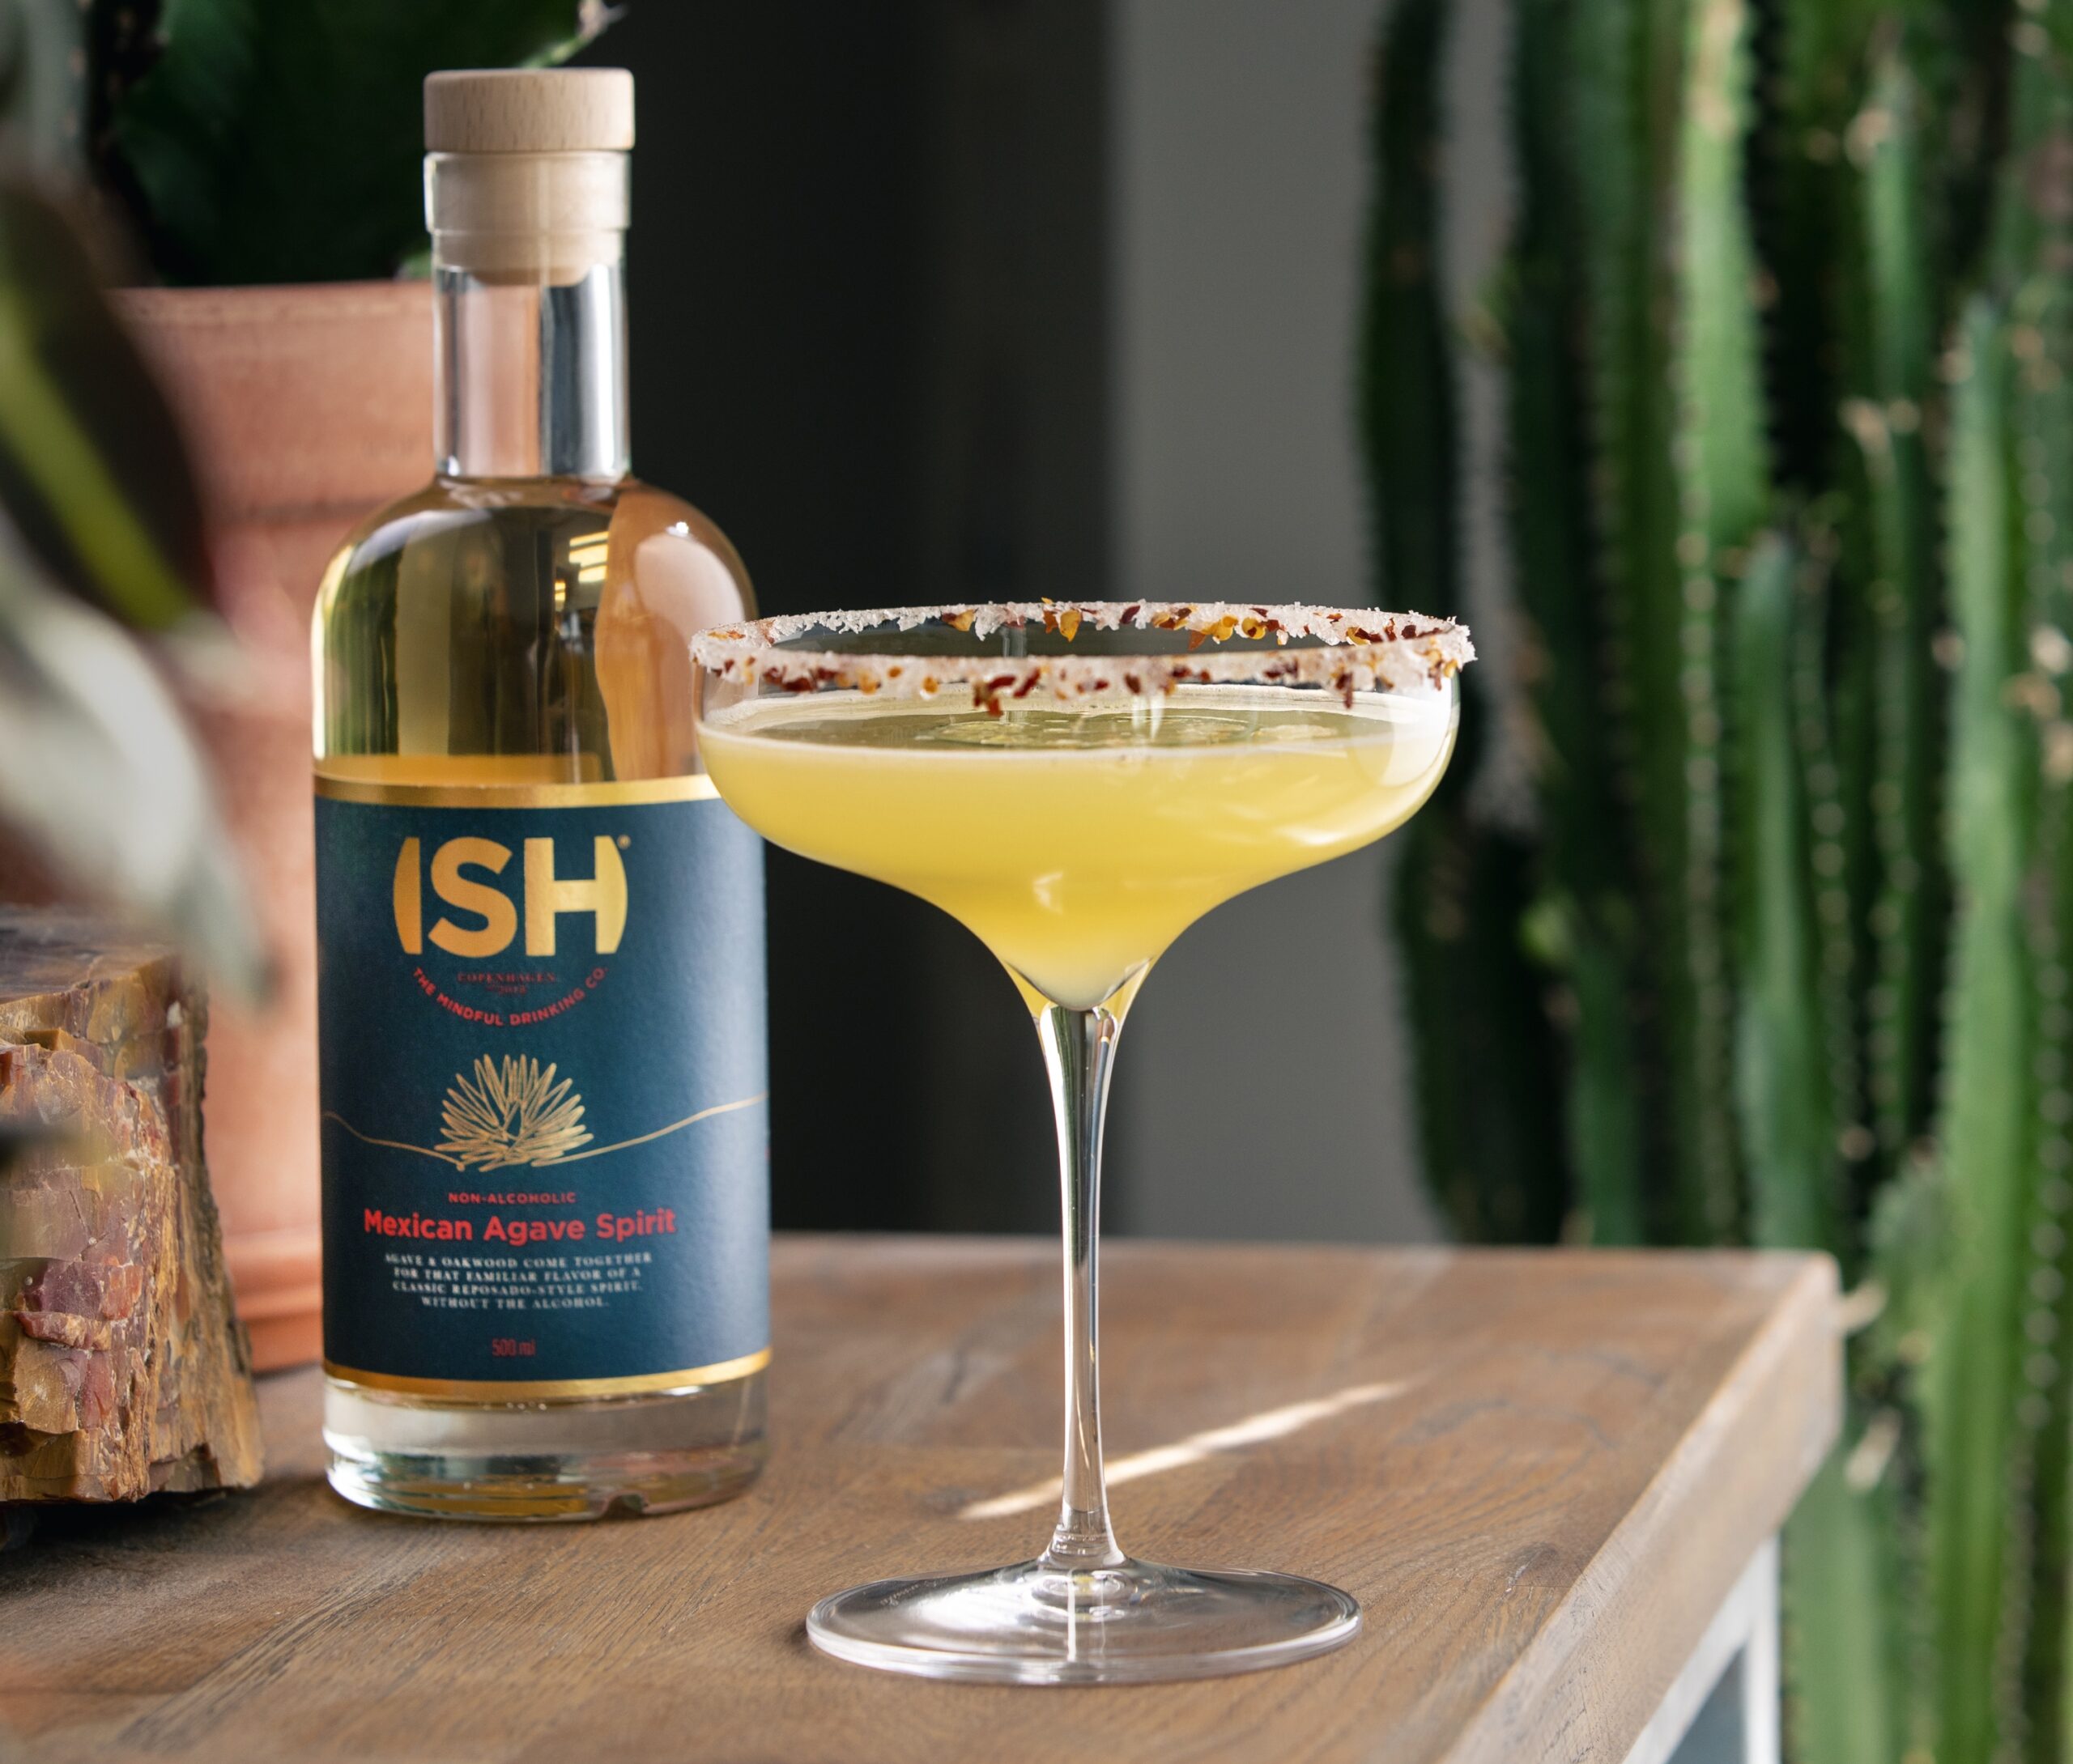 Raising a Non-Alcoholic Glass of ISH Spirits to Dry January